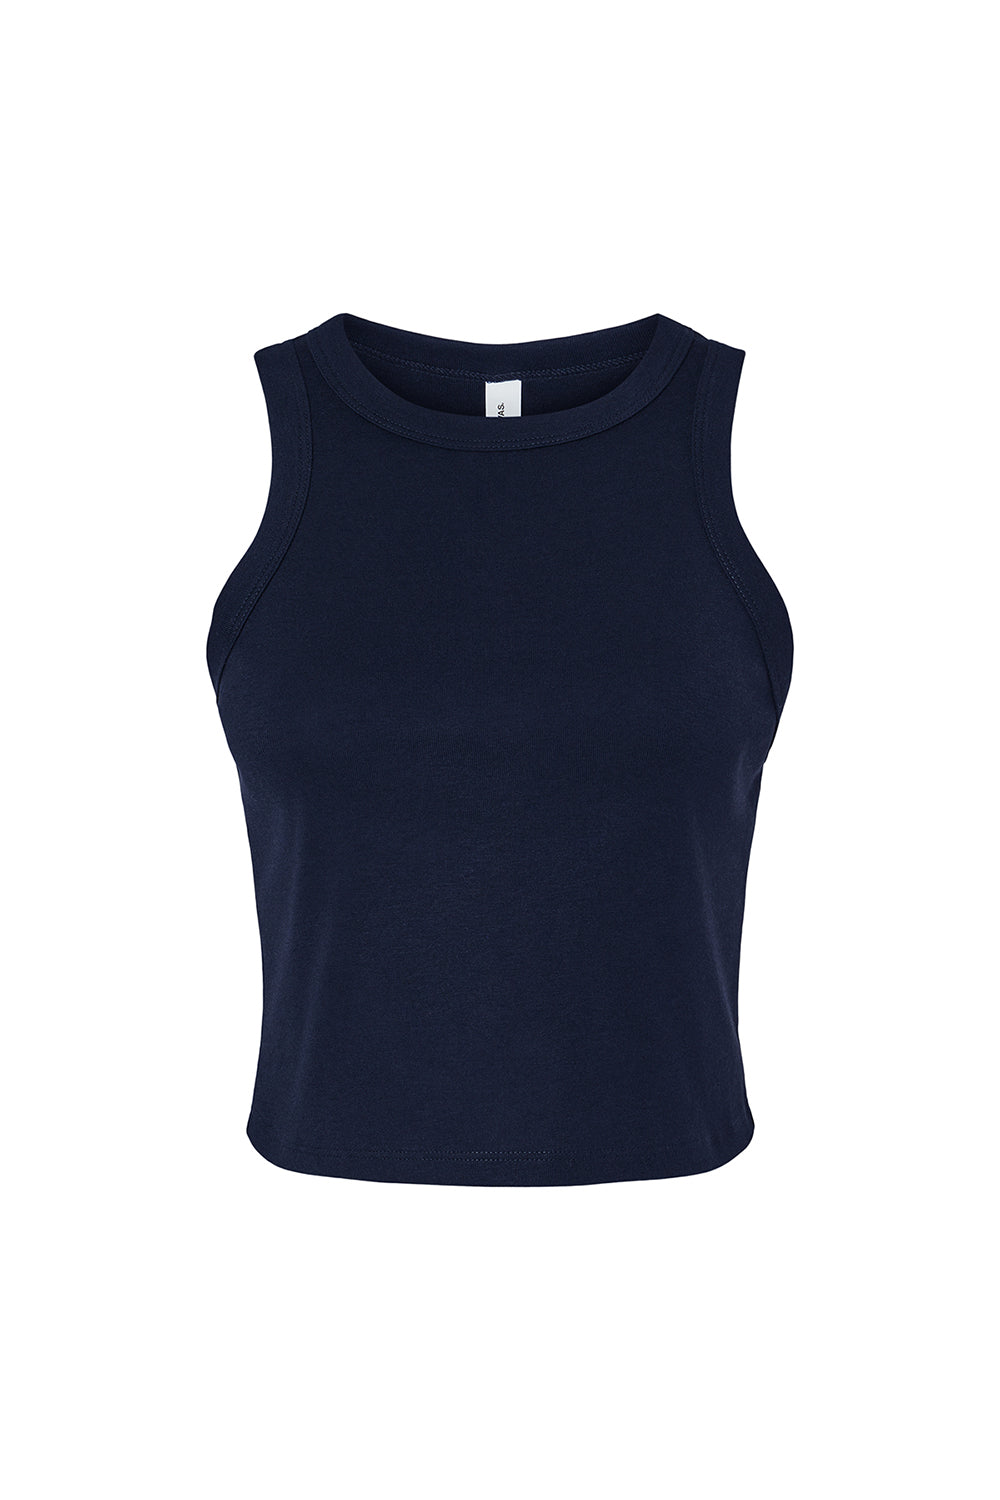 Bella + Canvas 1019 Womens Micro Ribbed Racerback Tank Top Navy Blue Flat Front